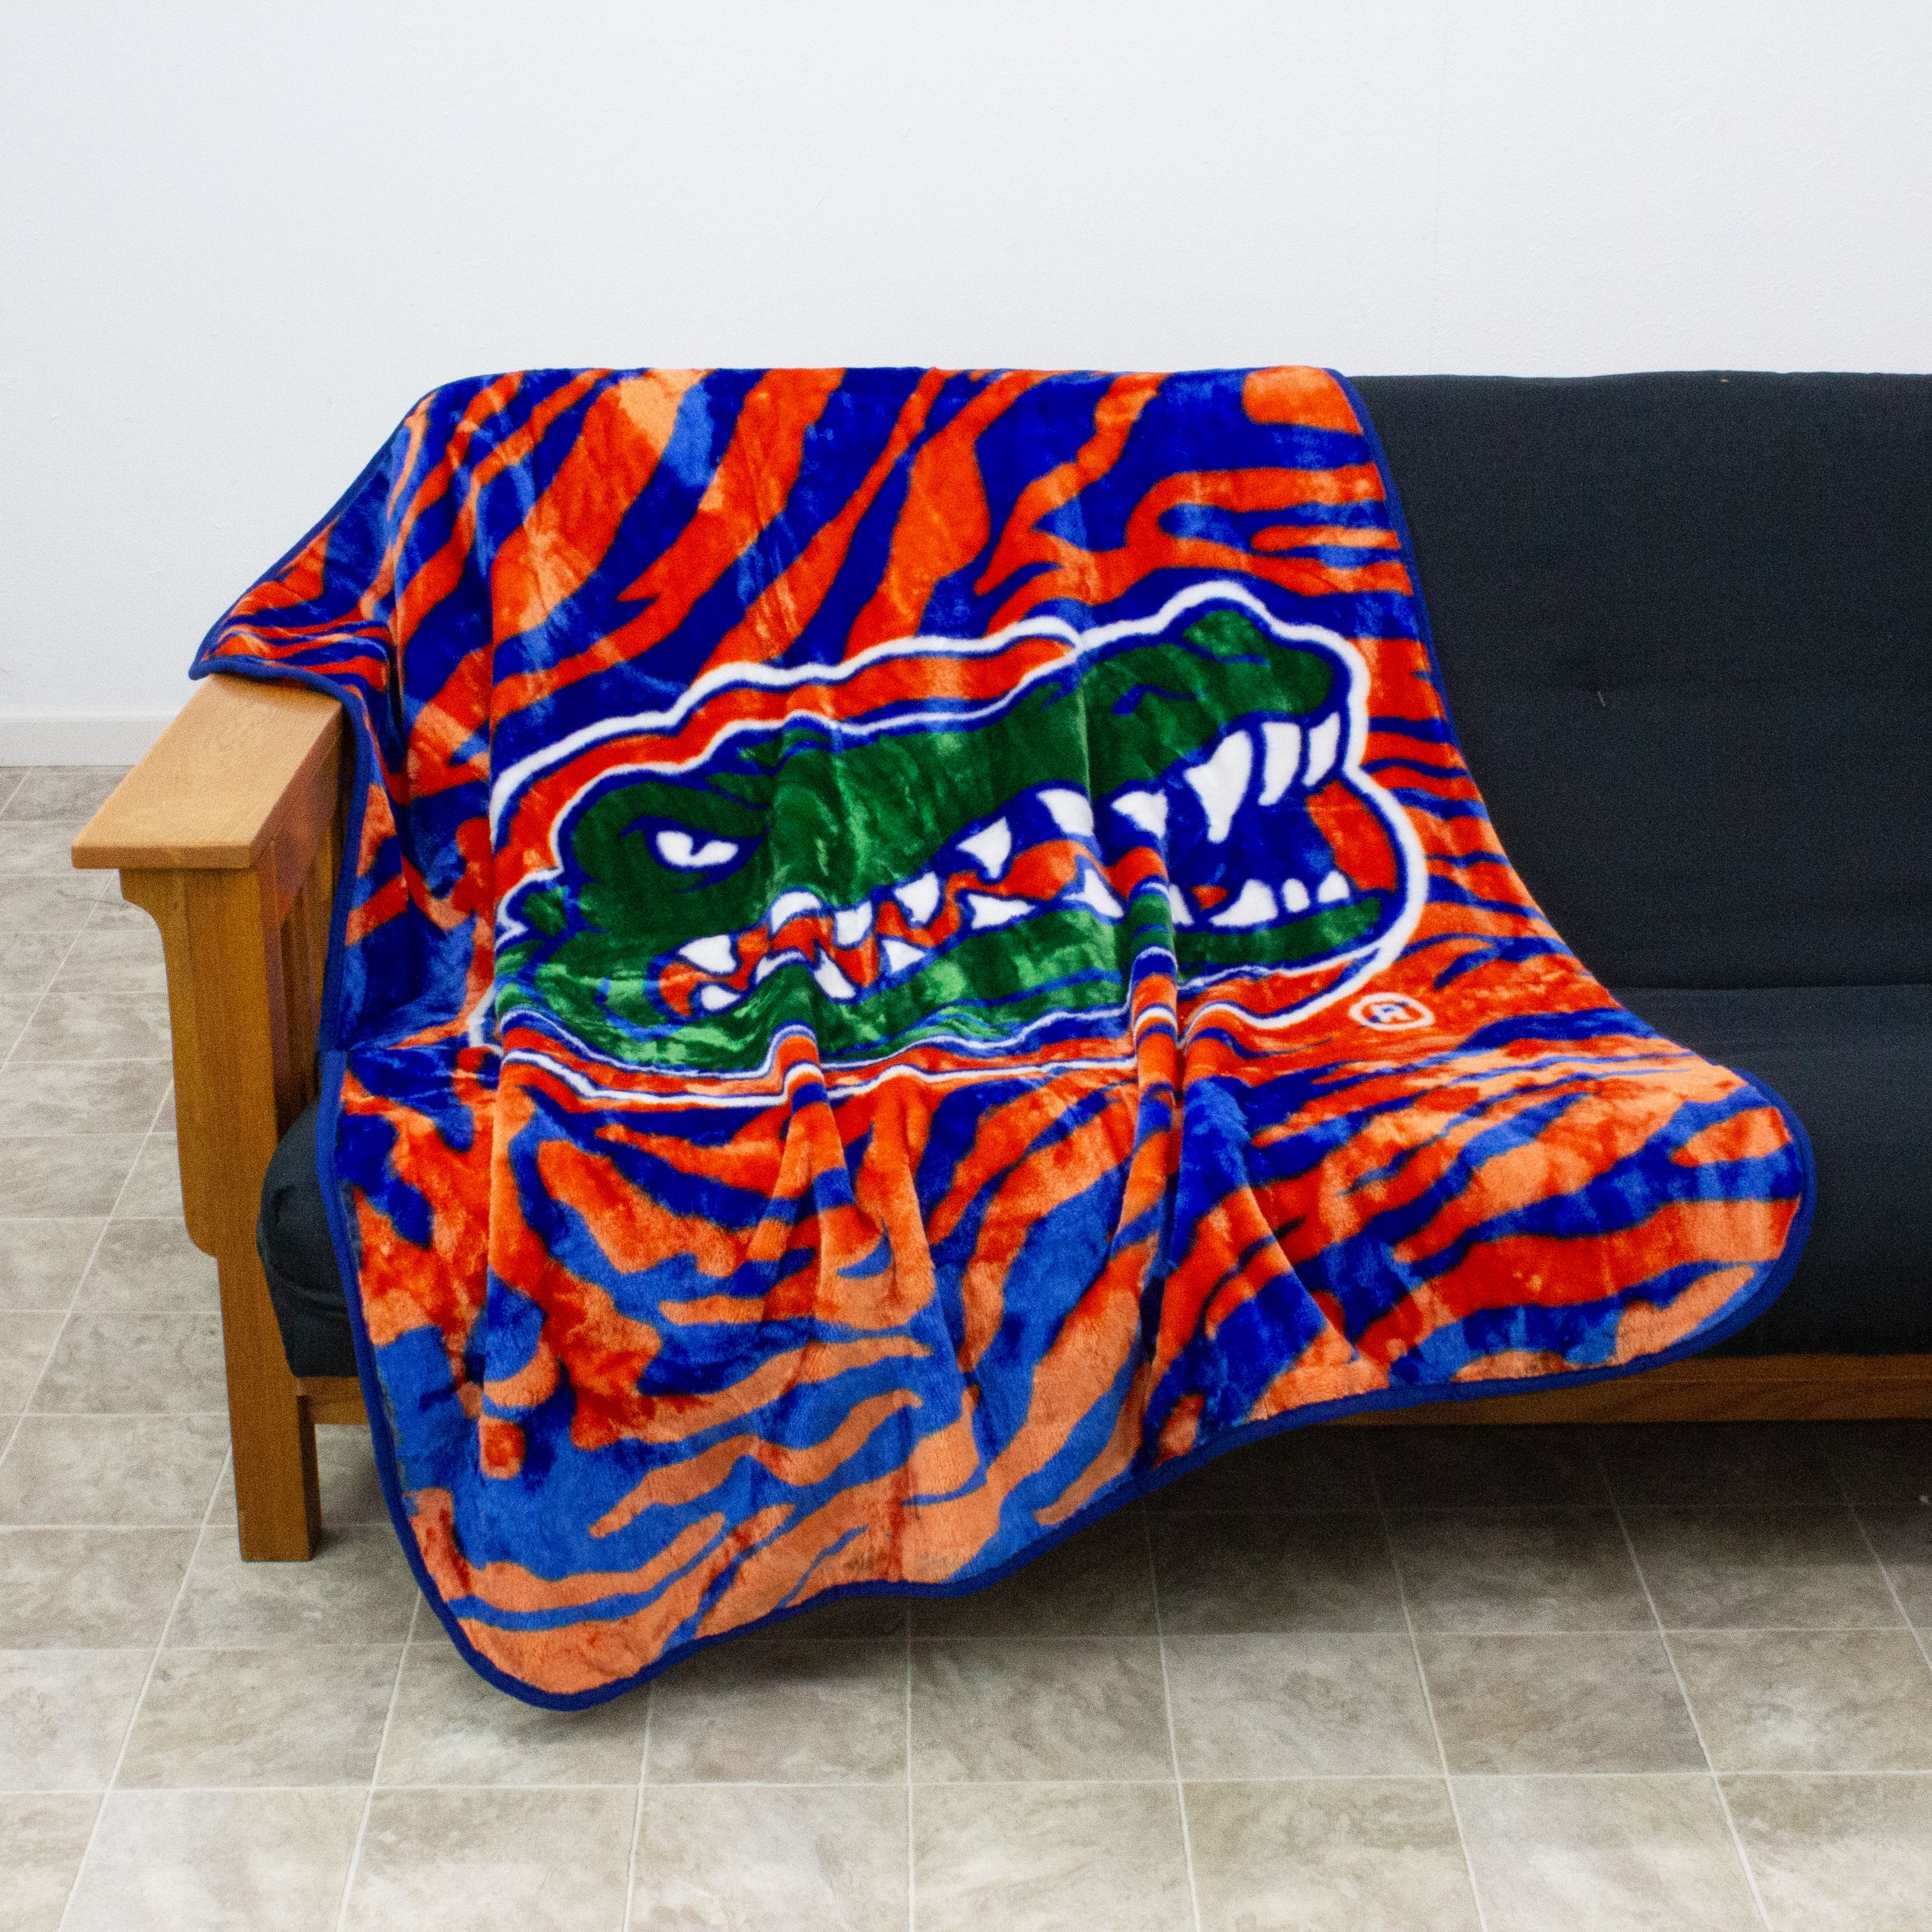 College Covers Everything Comfy Florida Gators Soft Raschel Throw Blanket, 60" x 50" - image 3 of 6